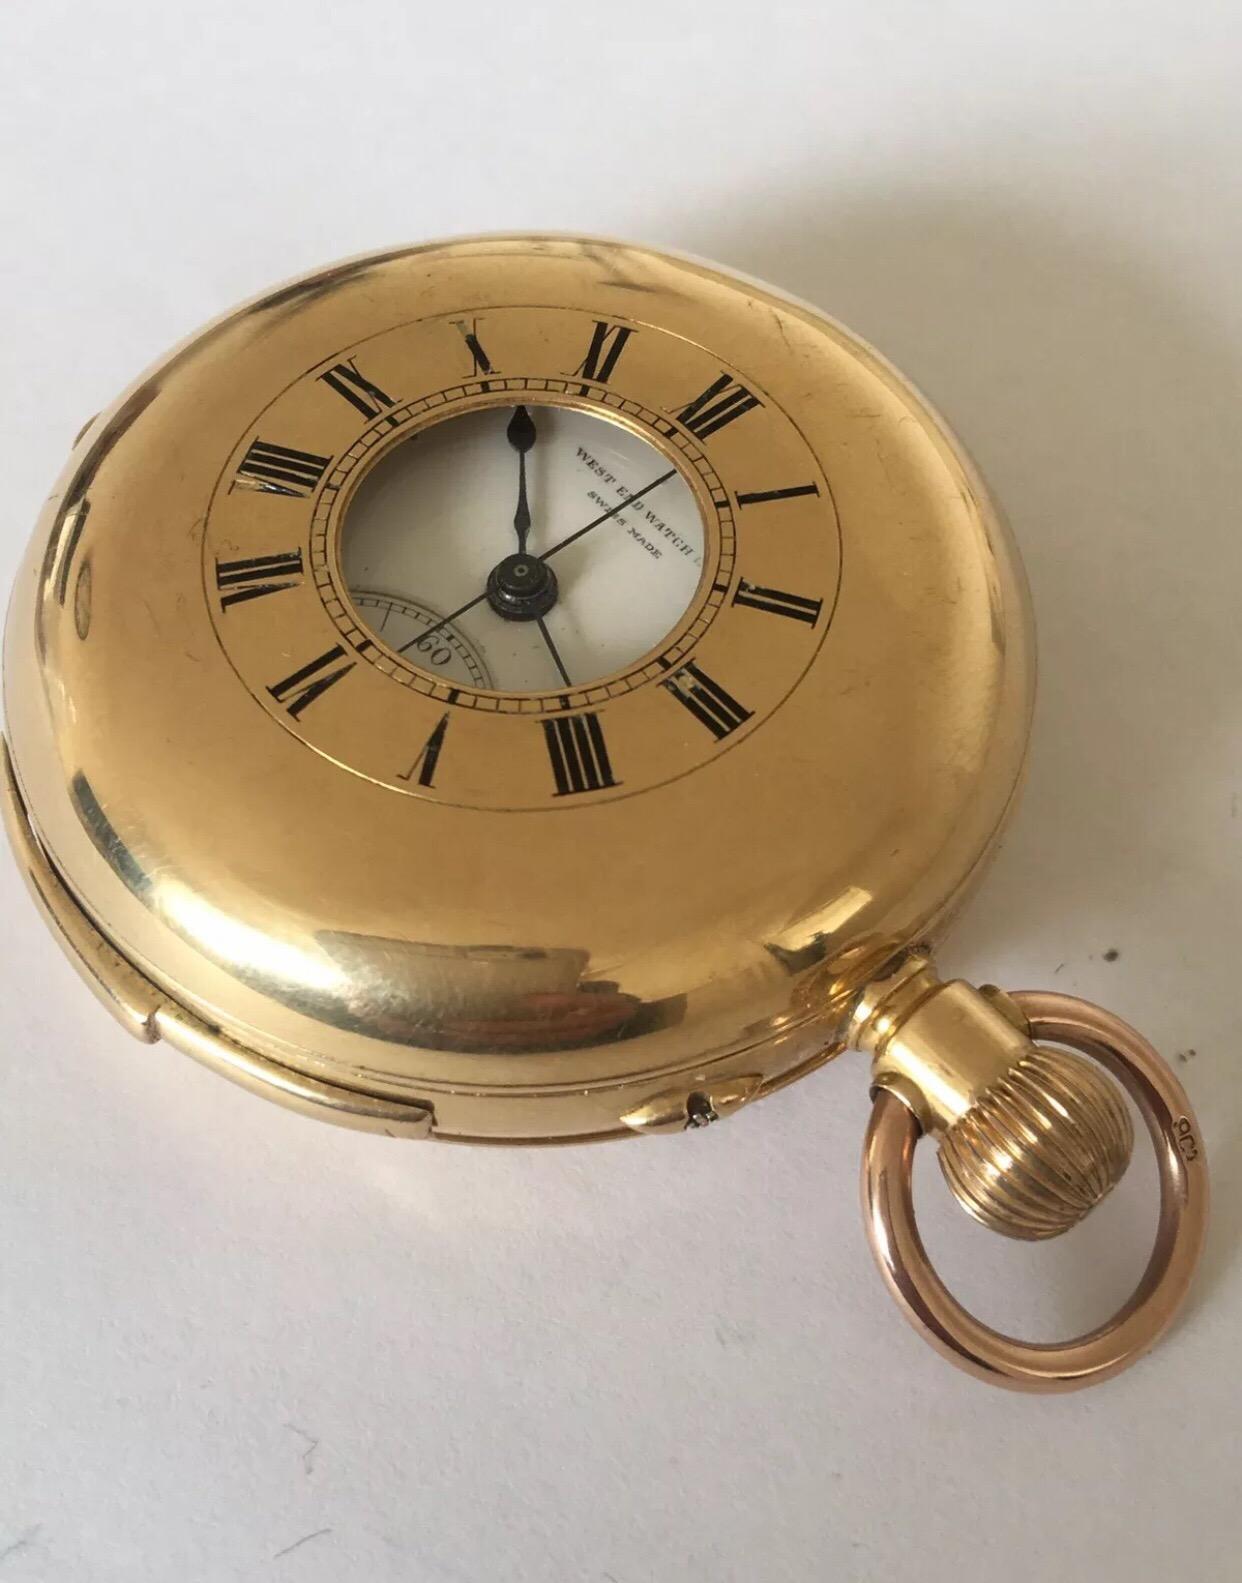 Antique 18 Karat Gold Minute Repeater Chronograph Half Hunter Pocket Watch For Sale 2